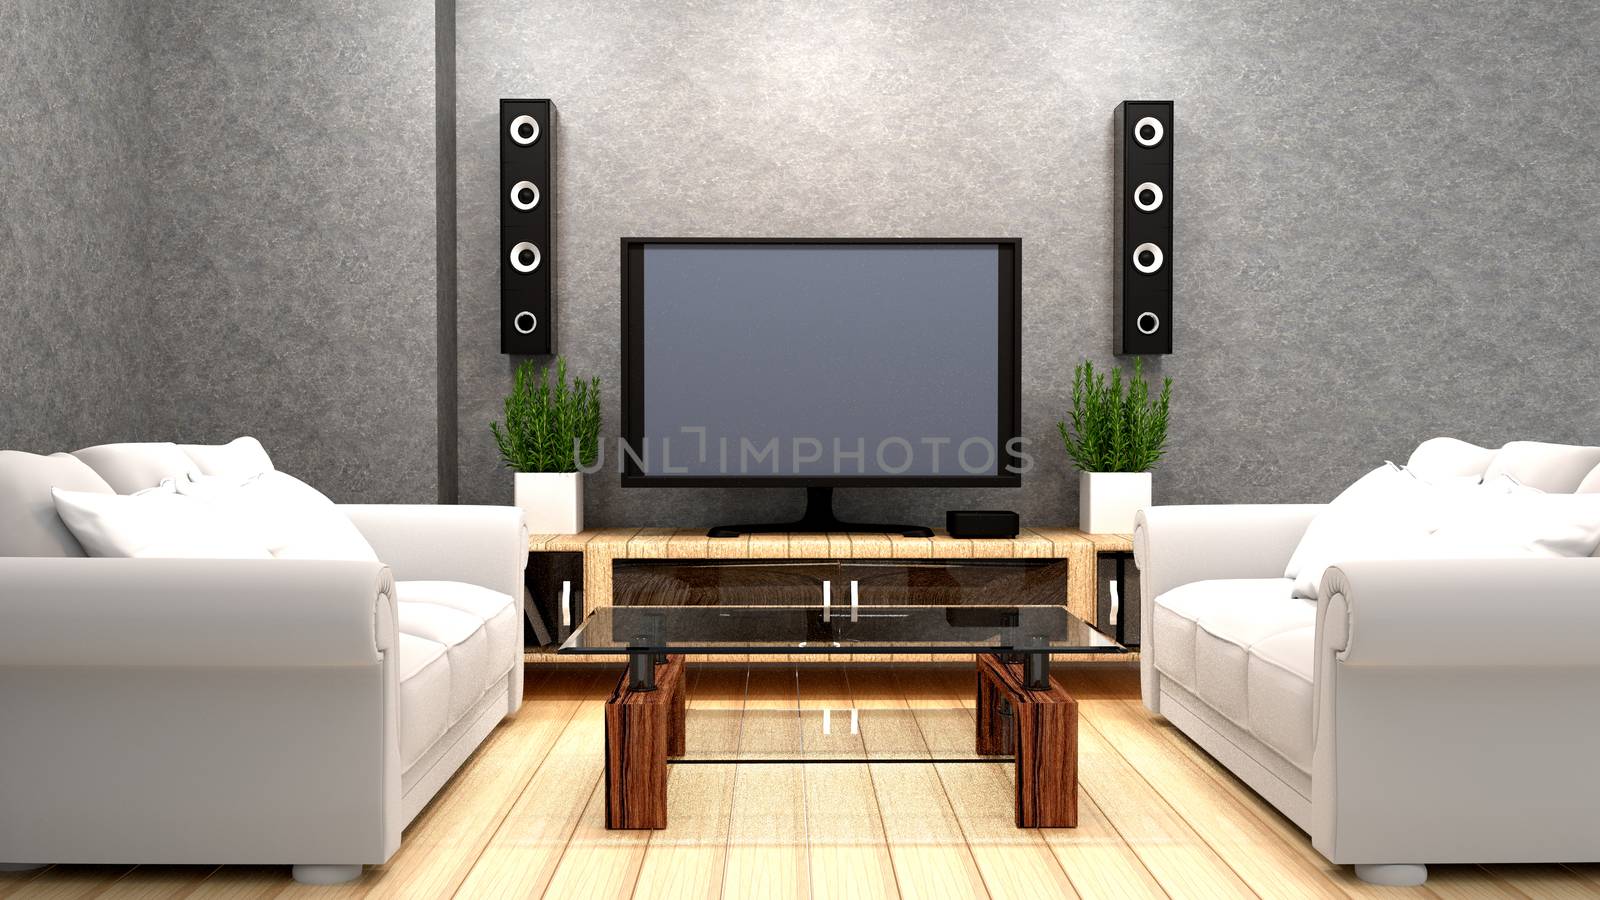 Karaoke room Modern red style with Tv and Loudspeaker. 3D render by Minny0012011@hotmail.com